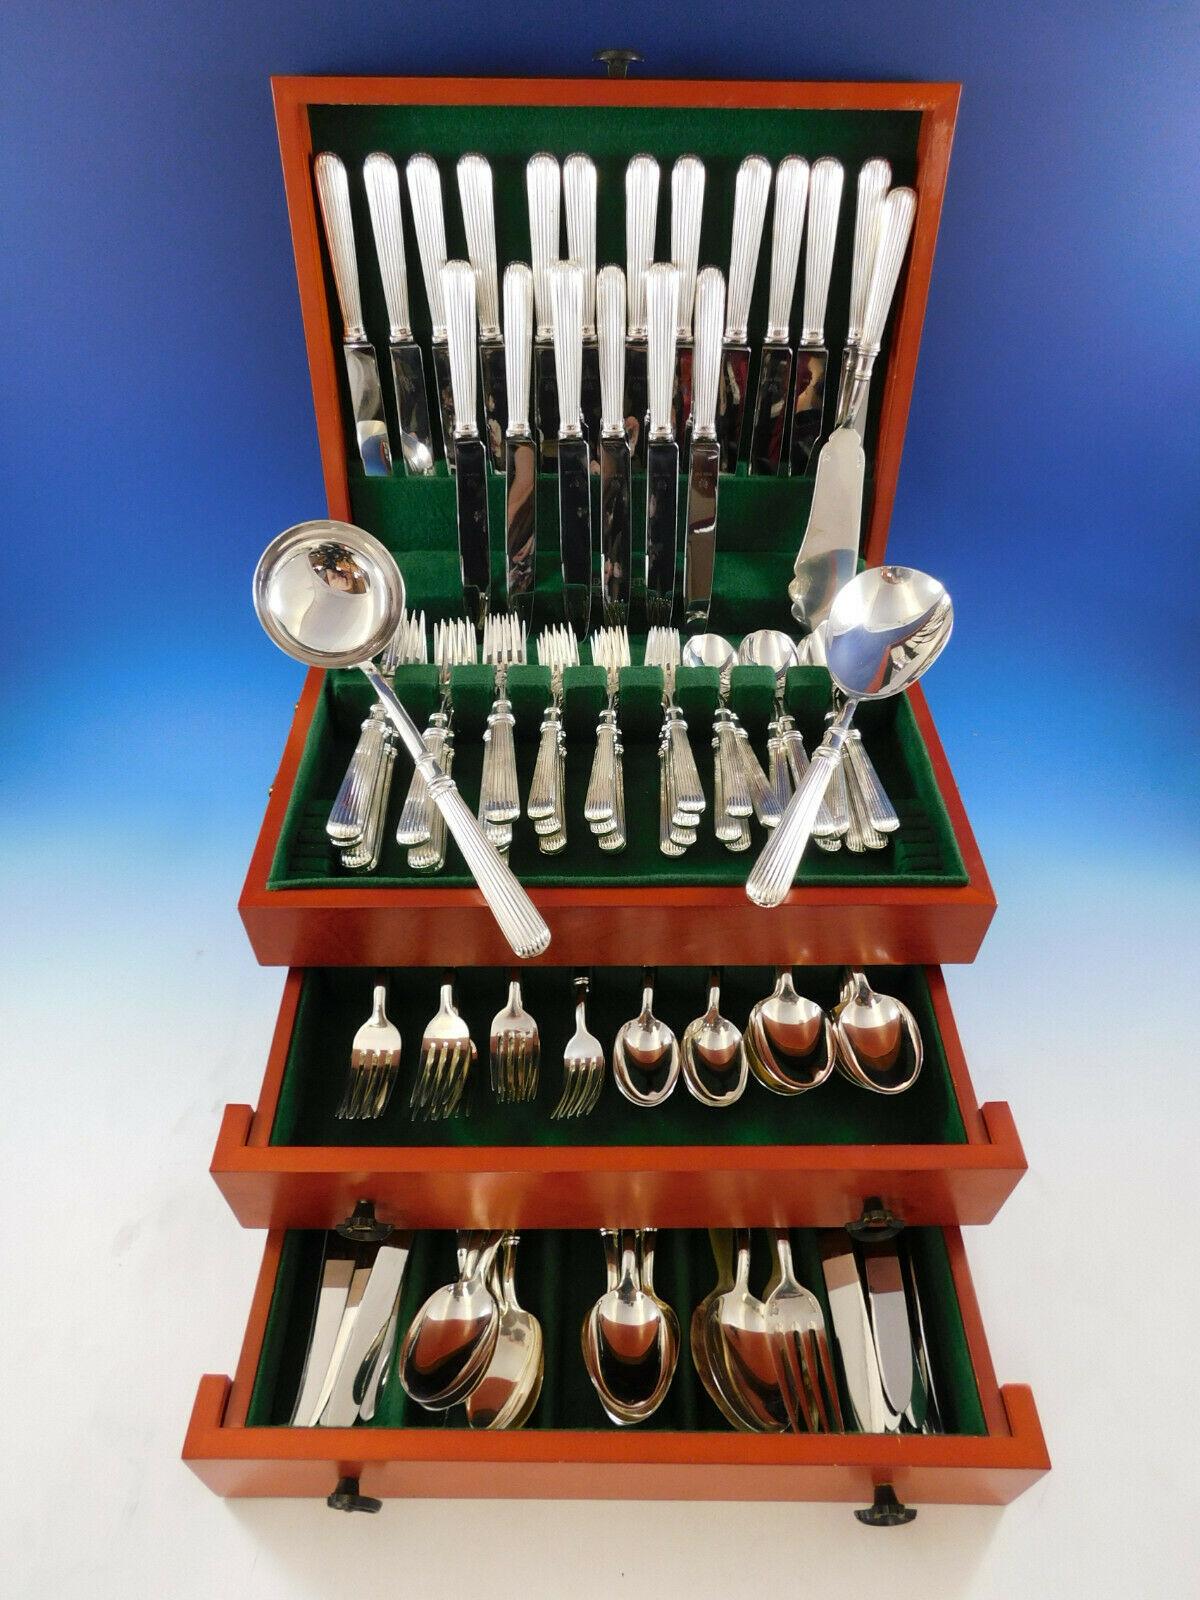 Superb dinner size Acropole by Cesa 1882 Italy 800 silver flatware set, 115 pieces. All of the pieces have hollow handles with a modern design of vertical ridges. This set includes:

18 dinner size knives w/pointed stainless blades, 9 3/4